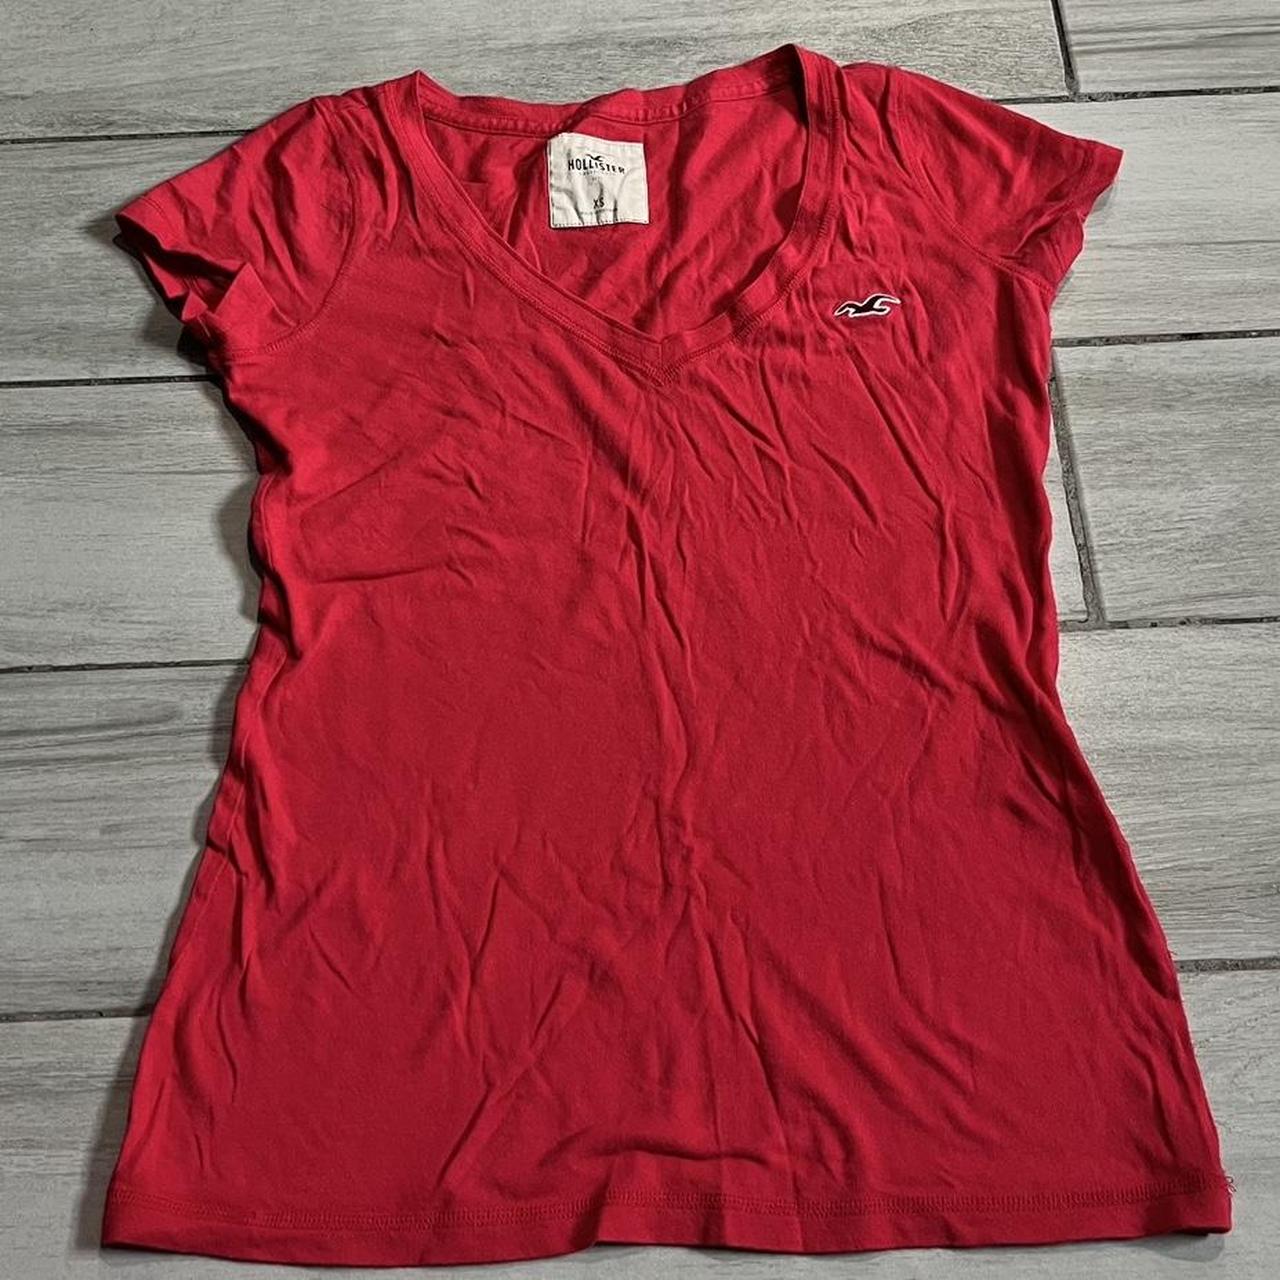 womens red and white striped Hollister shirt – RenewedtoYou